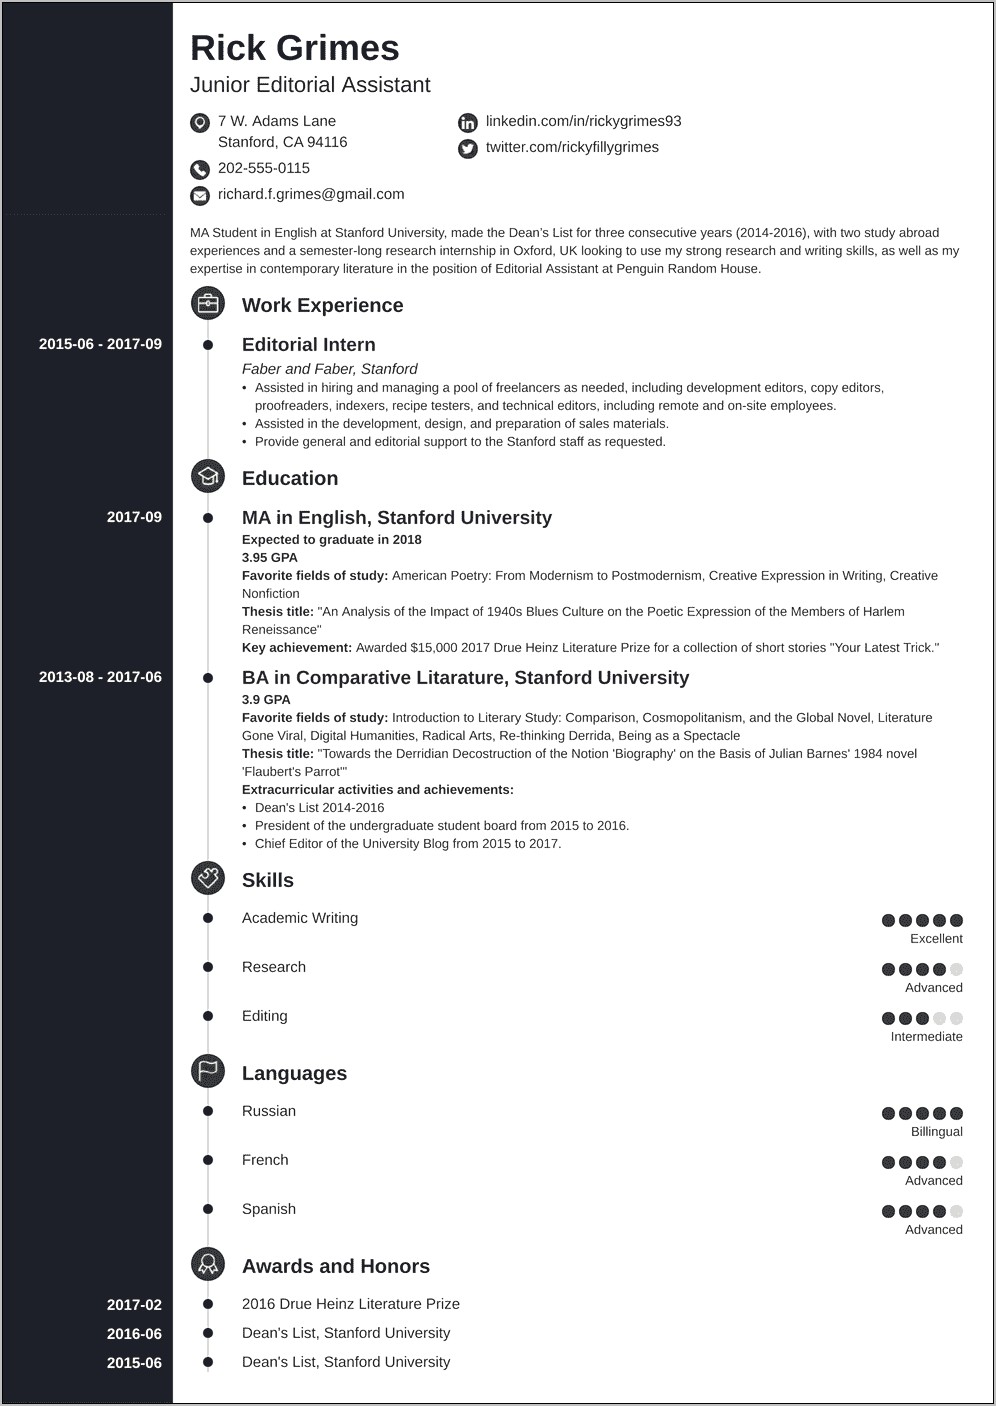 Resume Summary For Entry Level Position